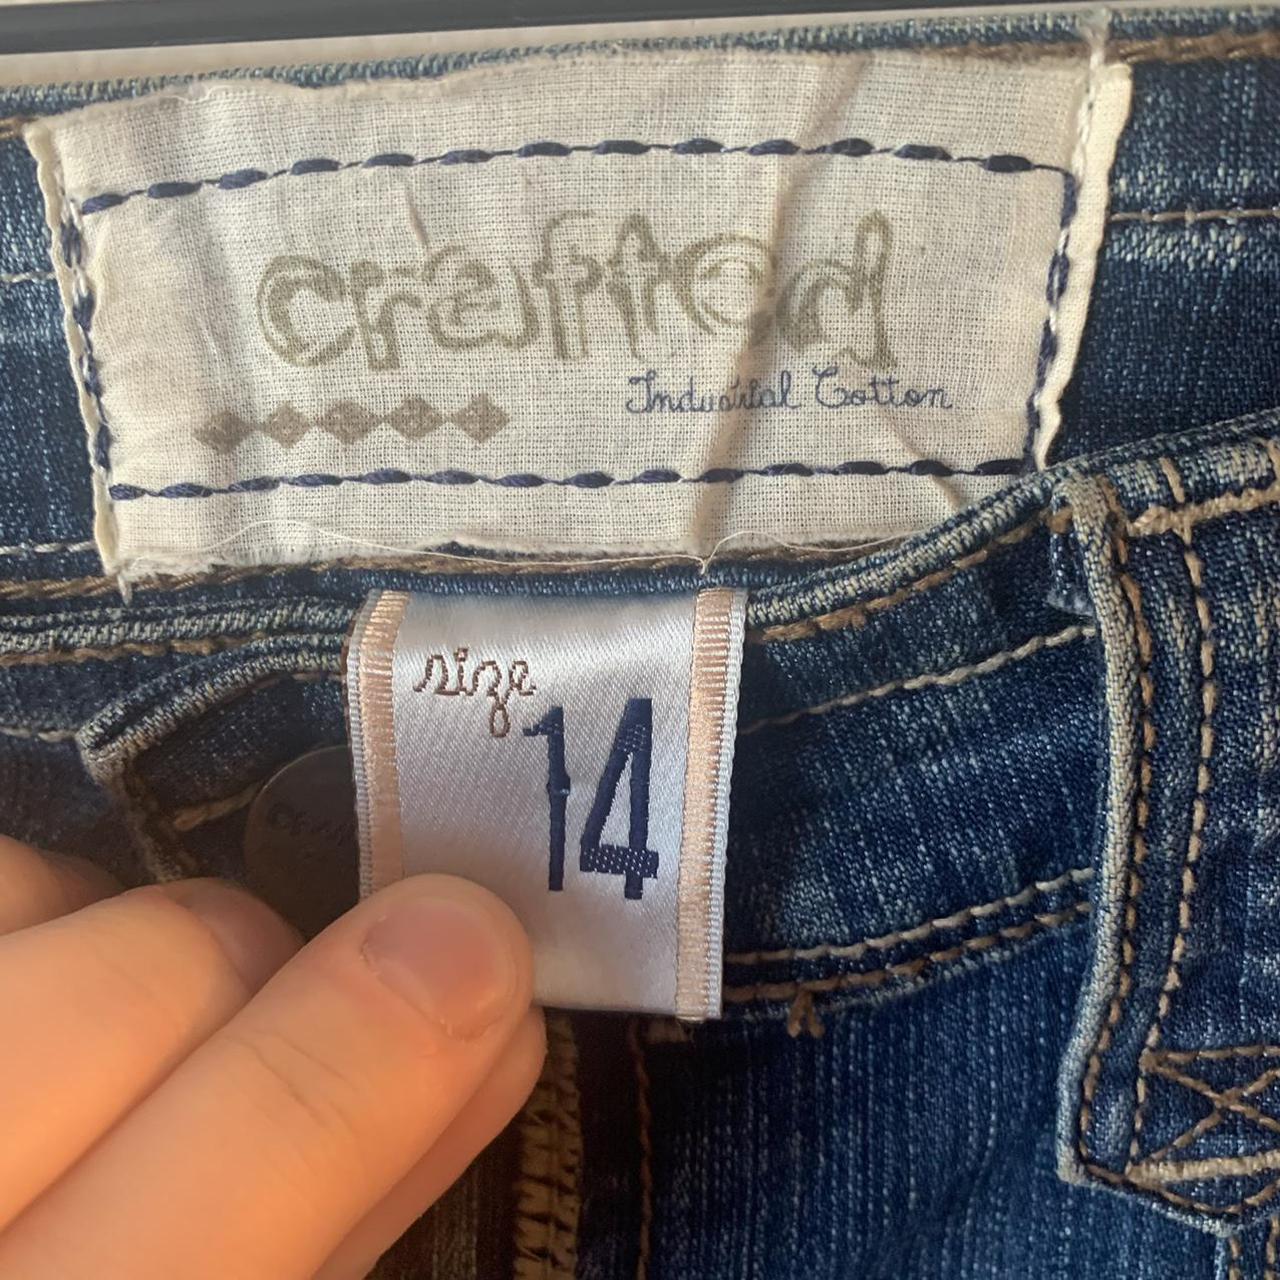 Adorable y2k fairycore bootcut jeans 💙 these are... - Depop